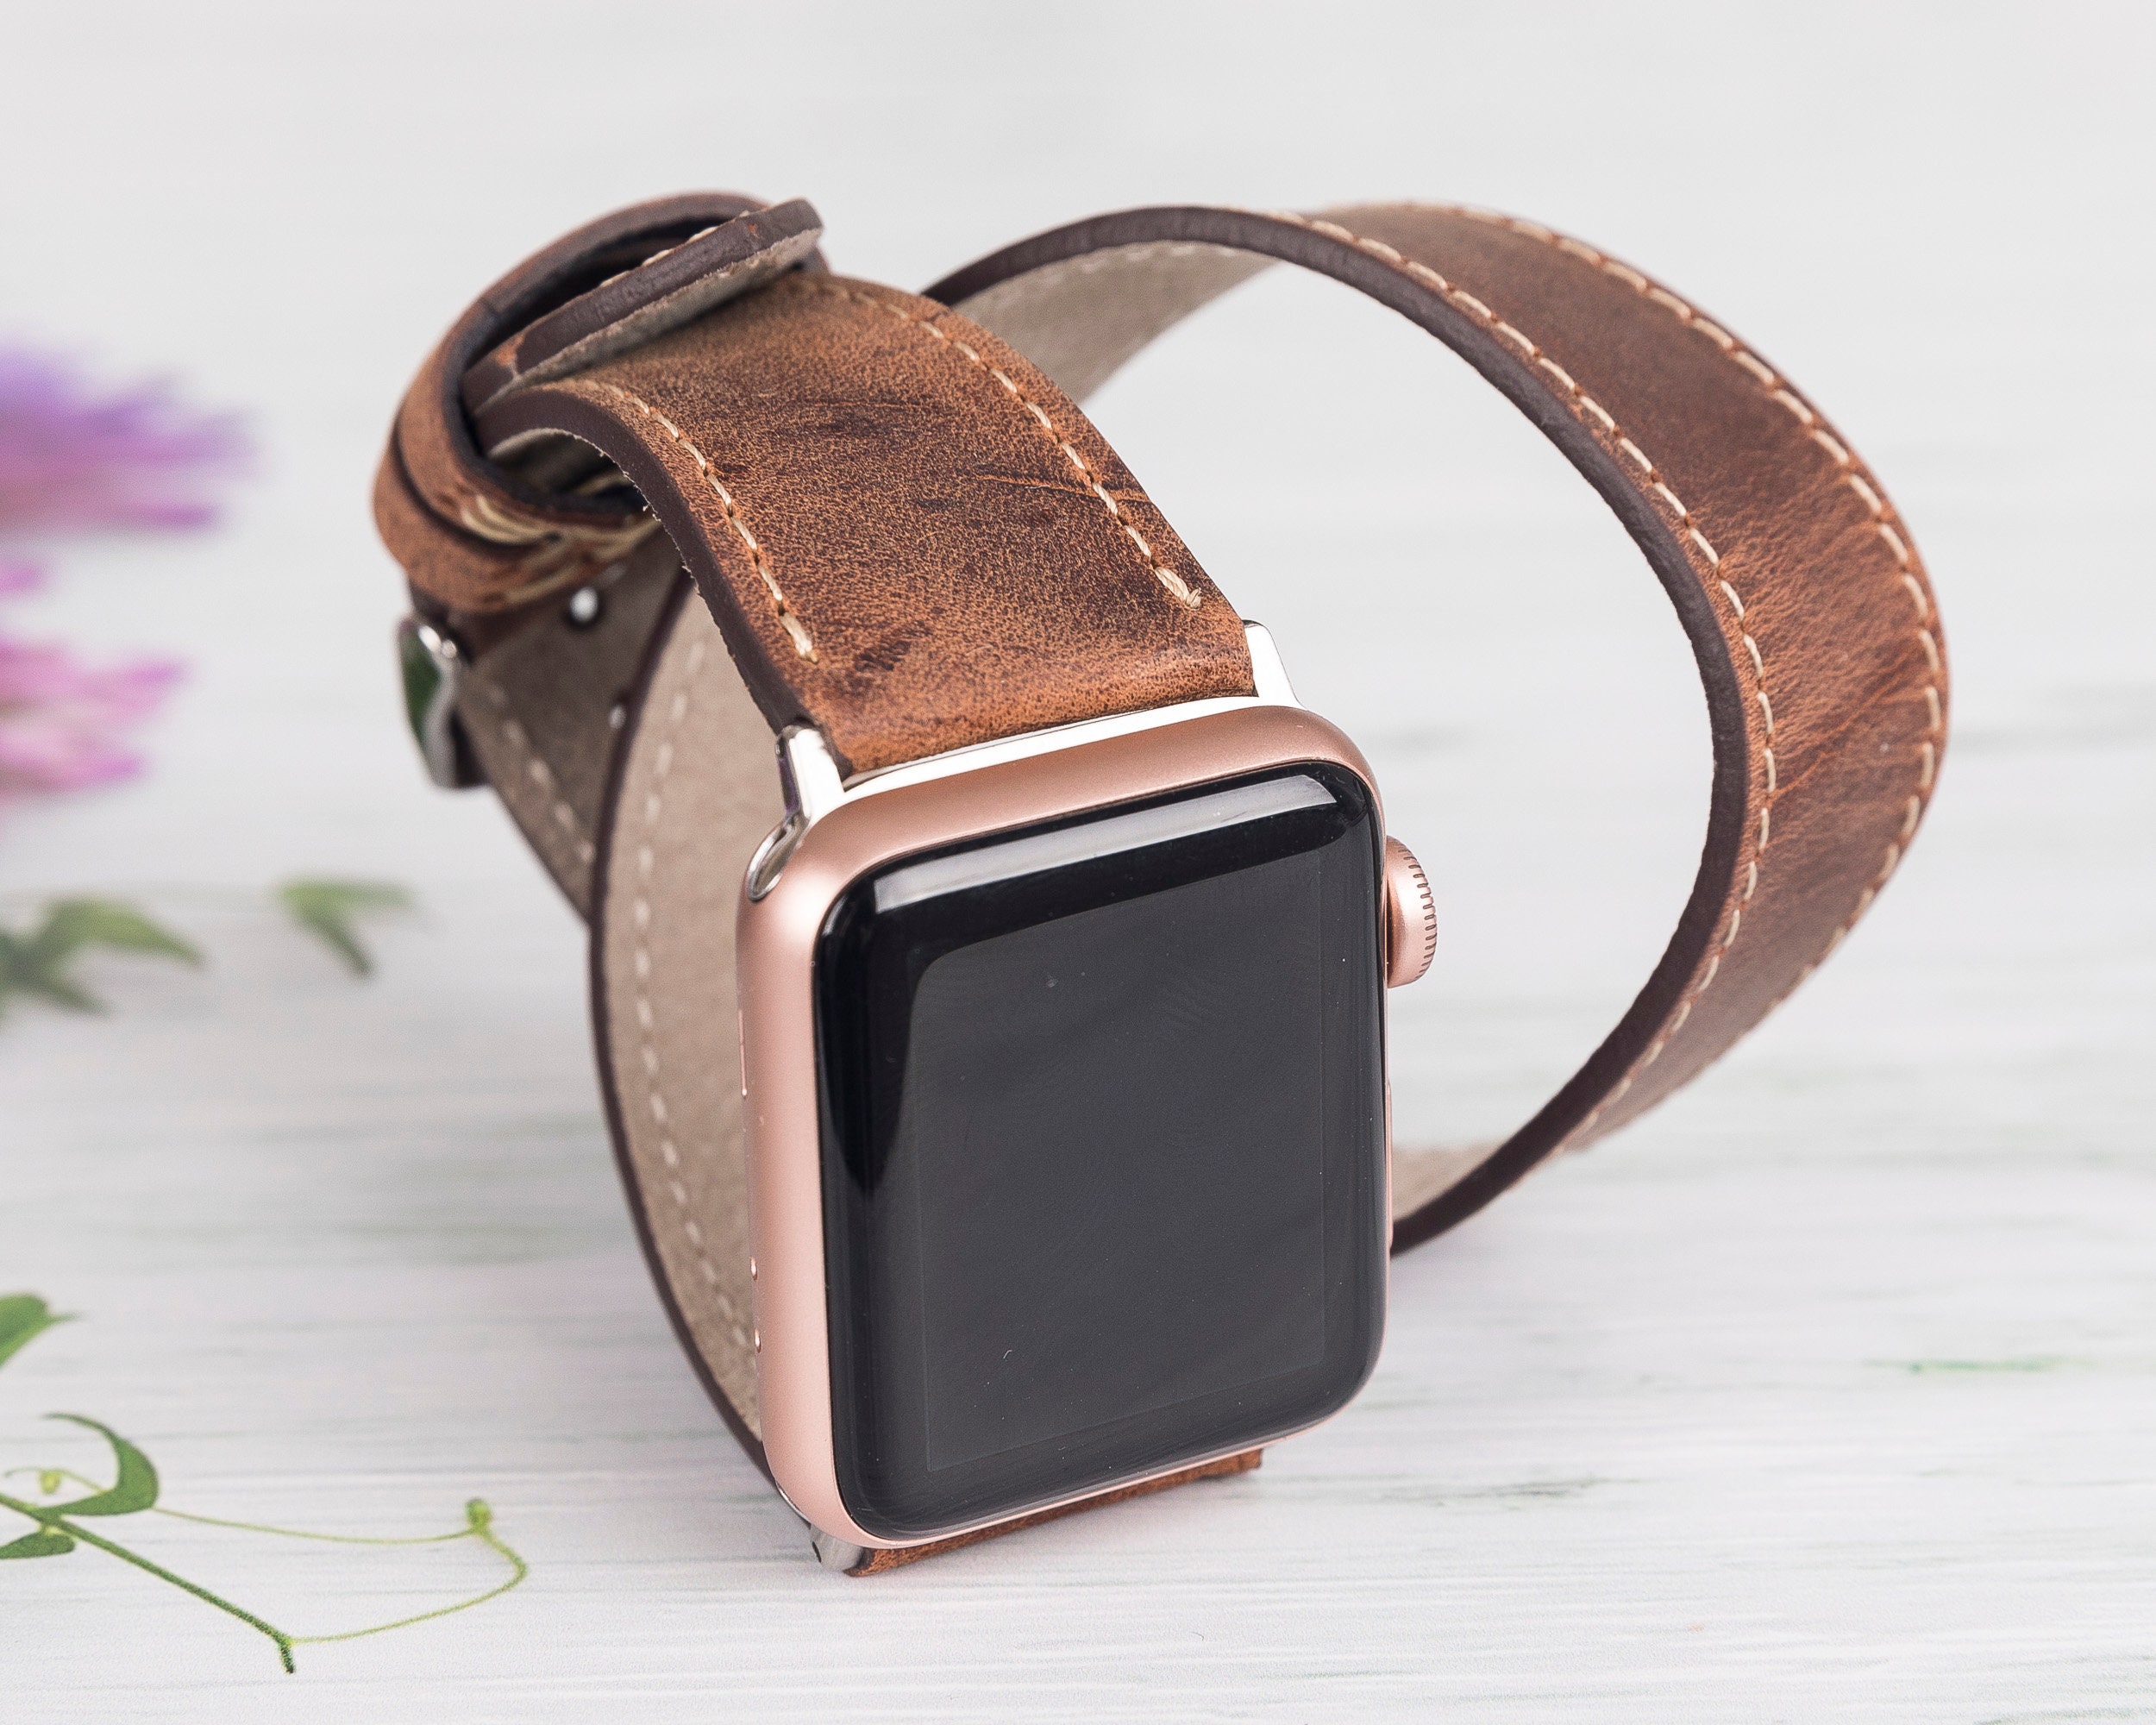 My hand stitched Louis Vuitton Apple Watch strap cut from a genuine leather  LV bag. What do you think? : r/AppleWatch